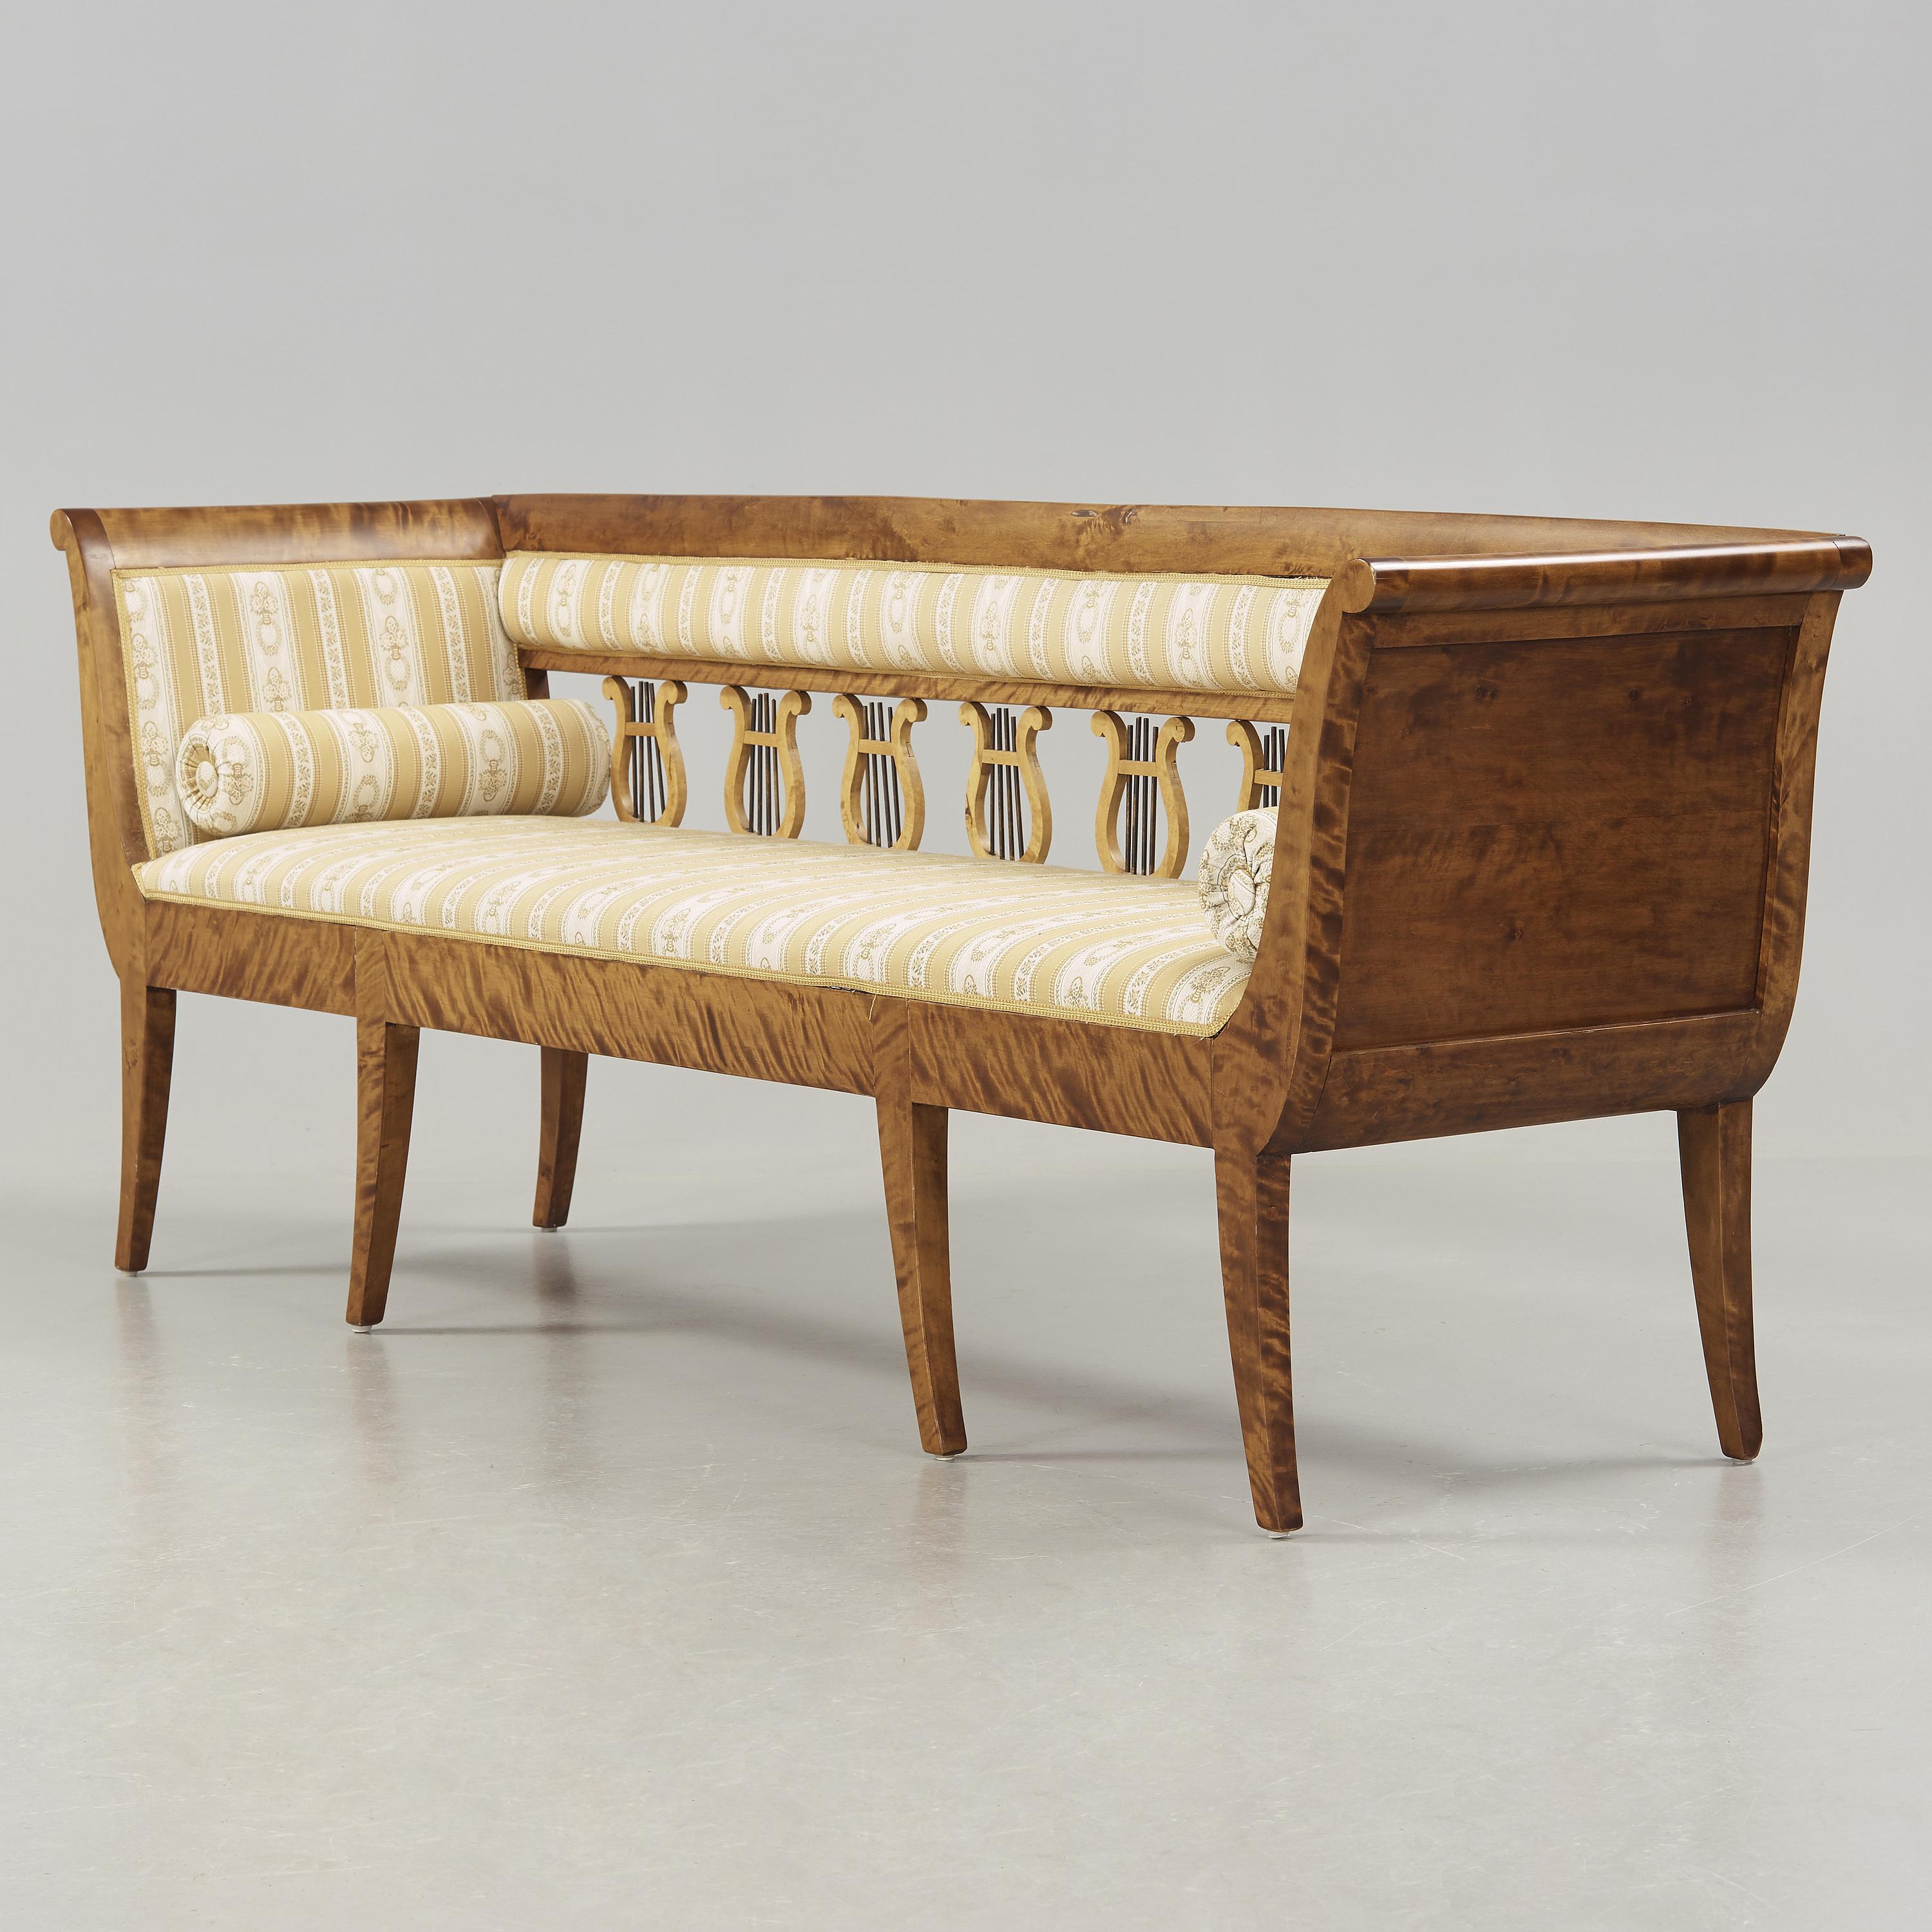 A truly elegant Gustavian period bench or sofa from early 19th C Sweden, 
in birchwood. This style epitomizes the elegance of the period and can be 
seen in many historic palaces and manoirs of the landed gentry in Sweden 
today. Perfect for a